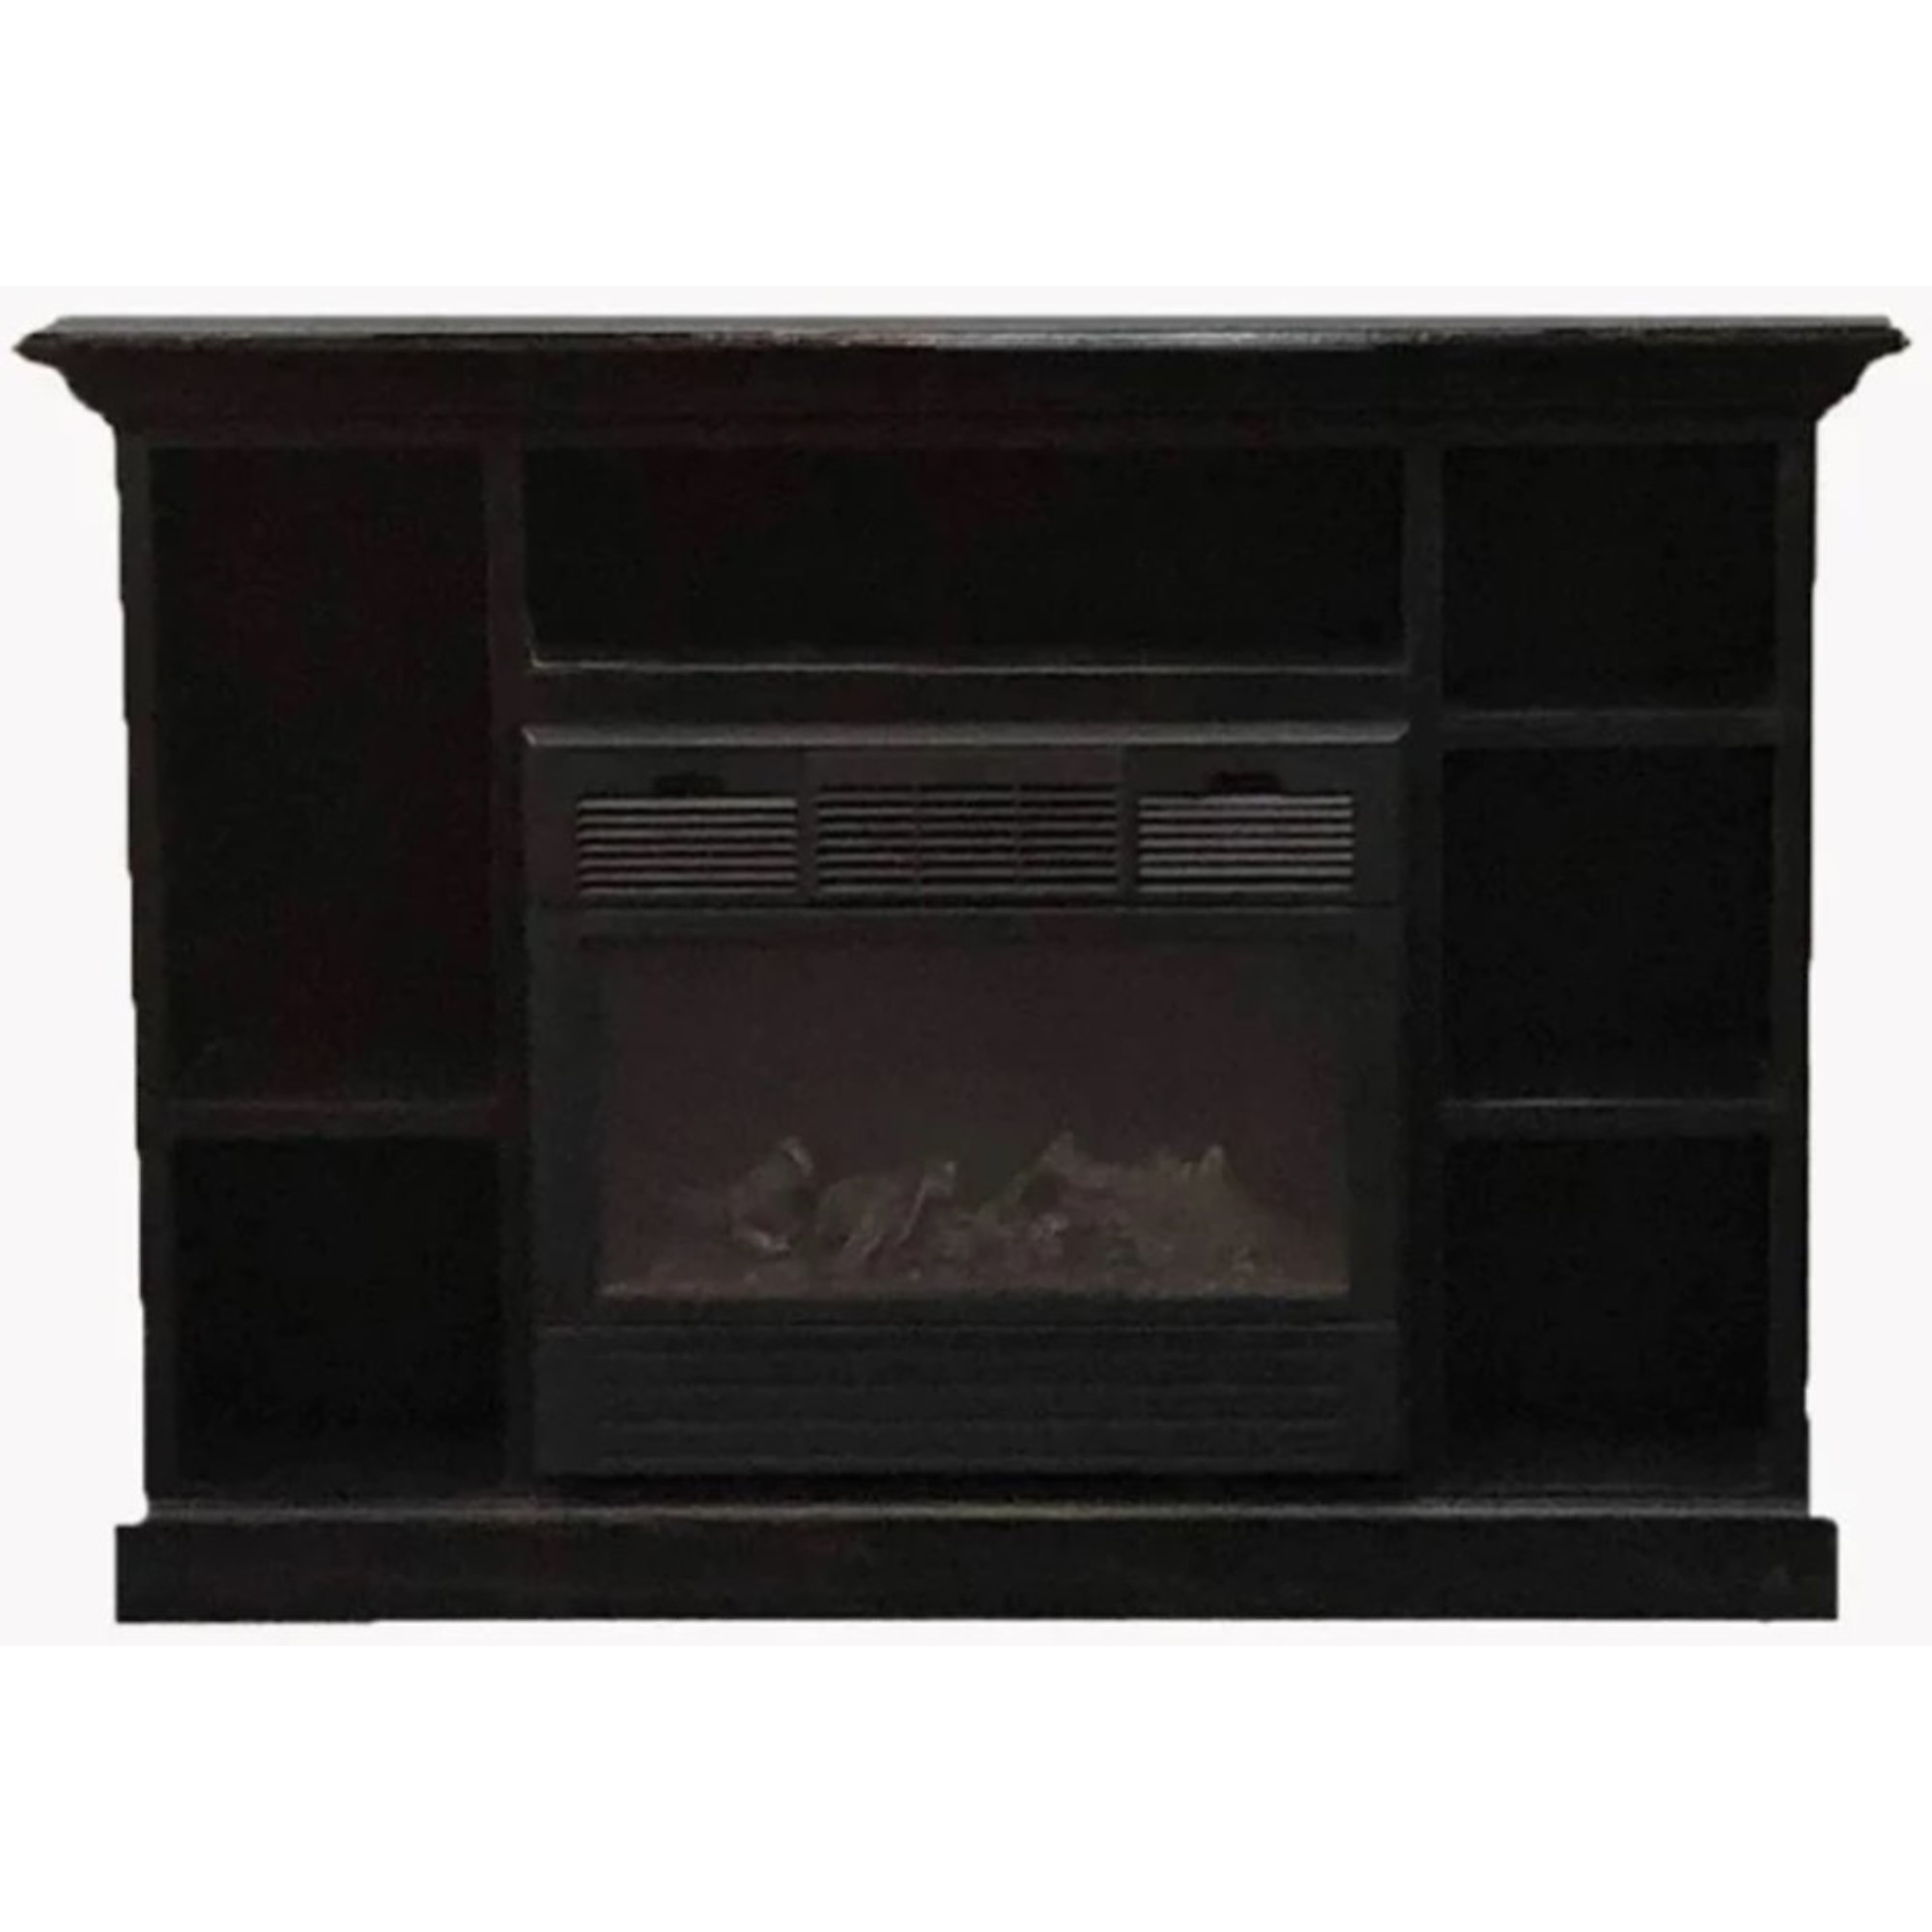 Buck, Vent Free Gas Fireplace with Black Mantel Combo, Heat Output 25000 Btu/hour, Heating Capability 1000 ftÂ², Model NV 11272LPPRES-BLK